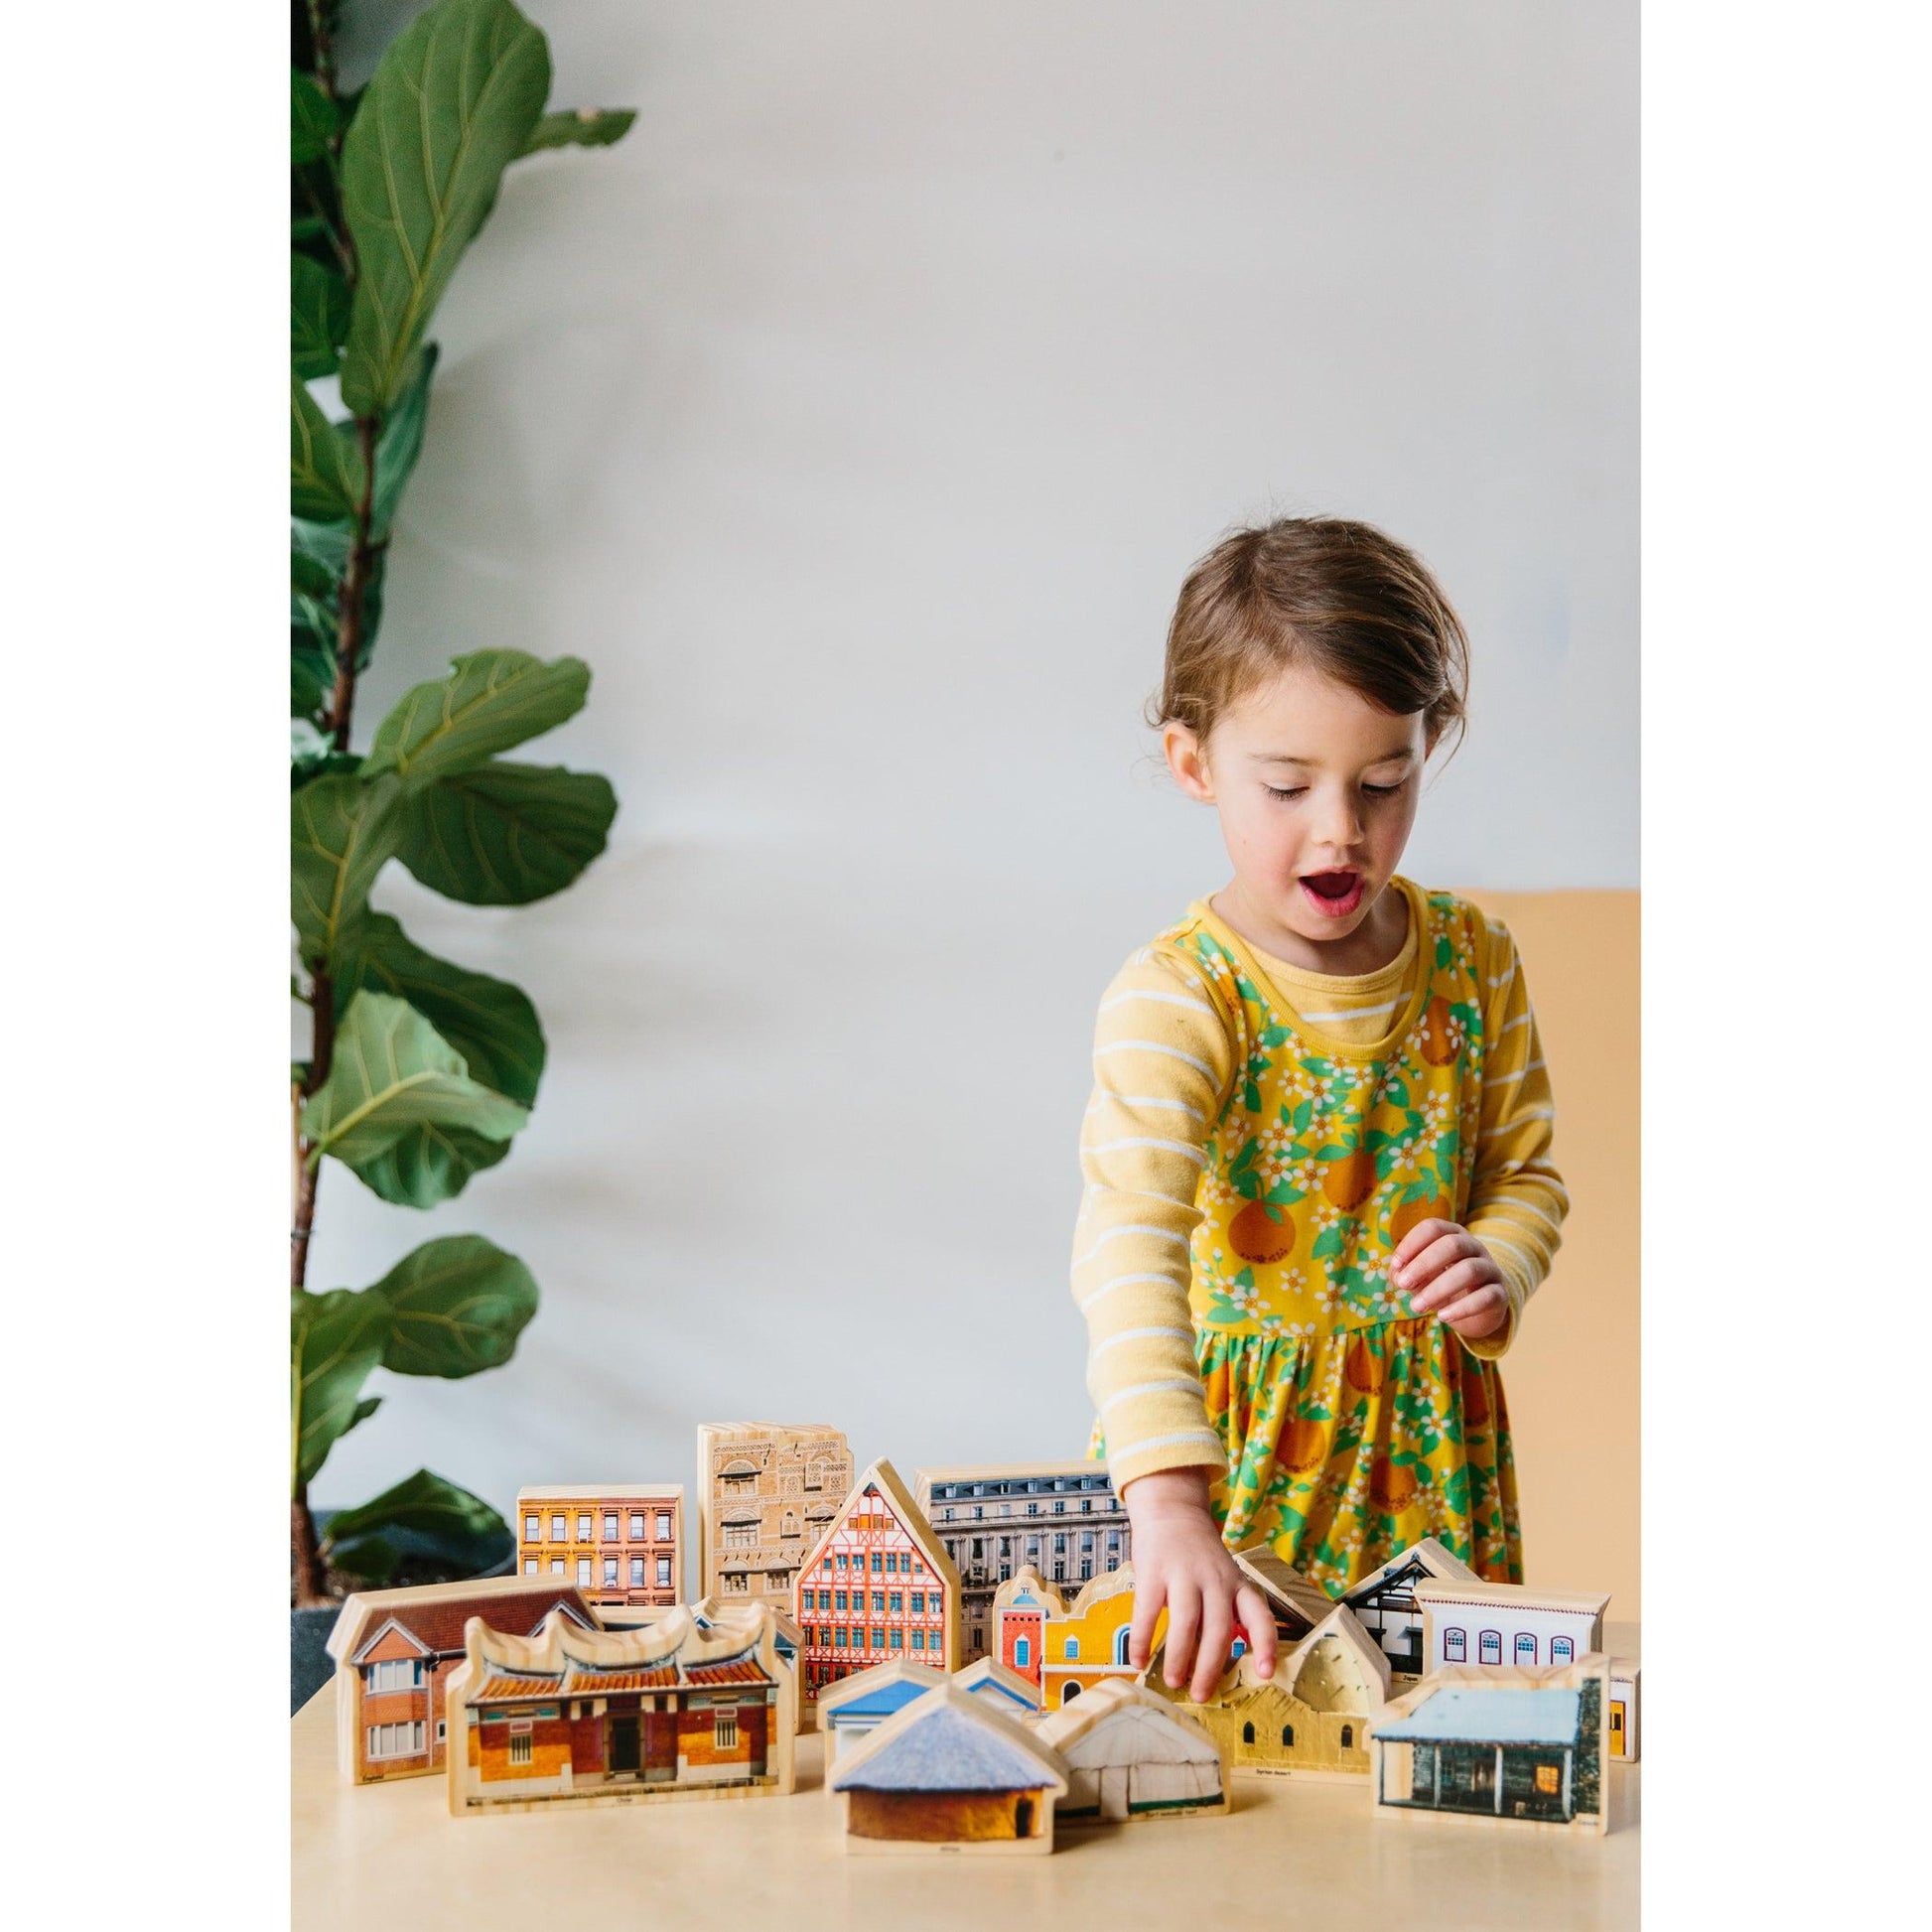 Where I Live? Wooden Blocks - Set of 17 - Ages 1+ - Loomini